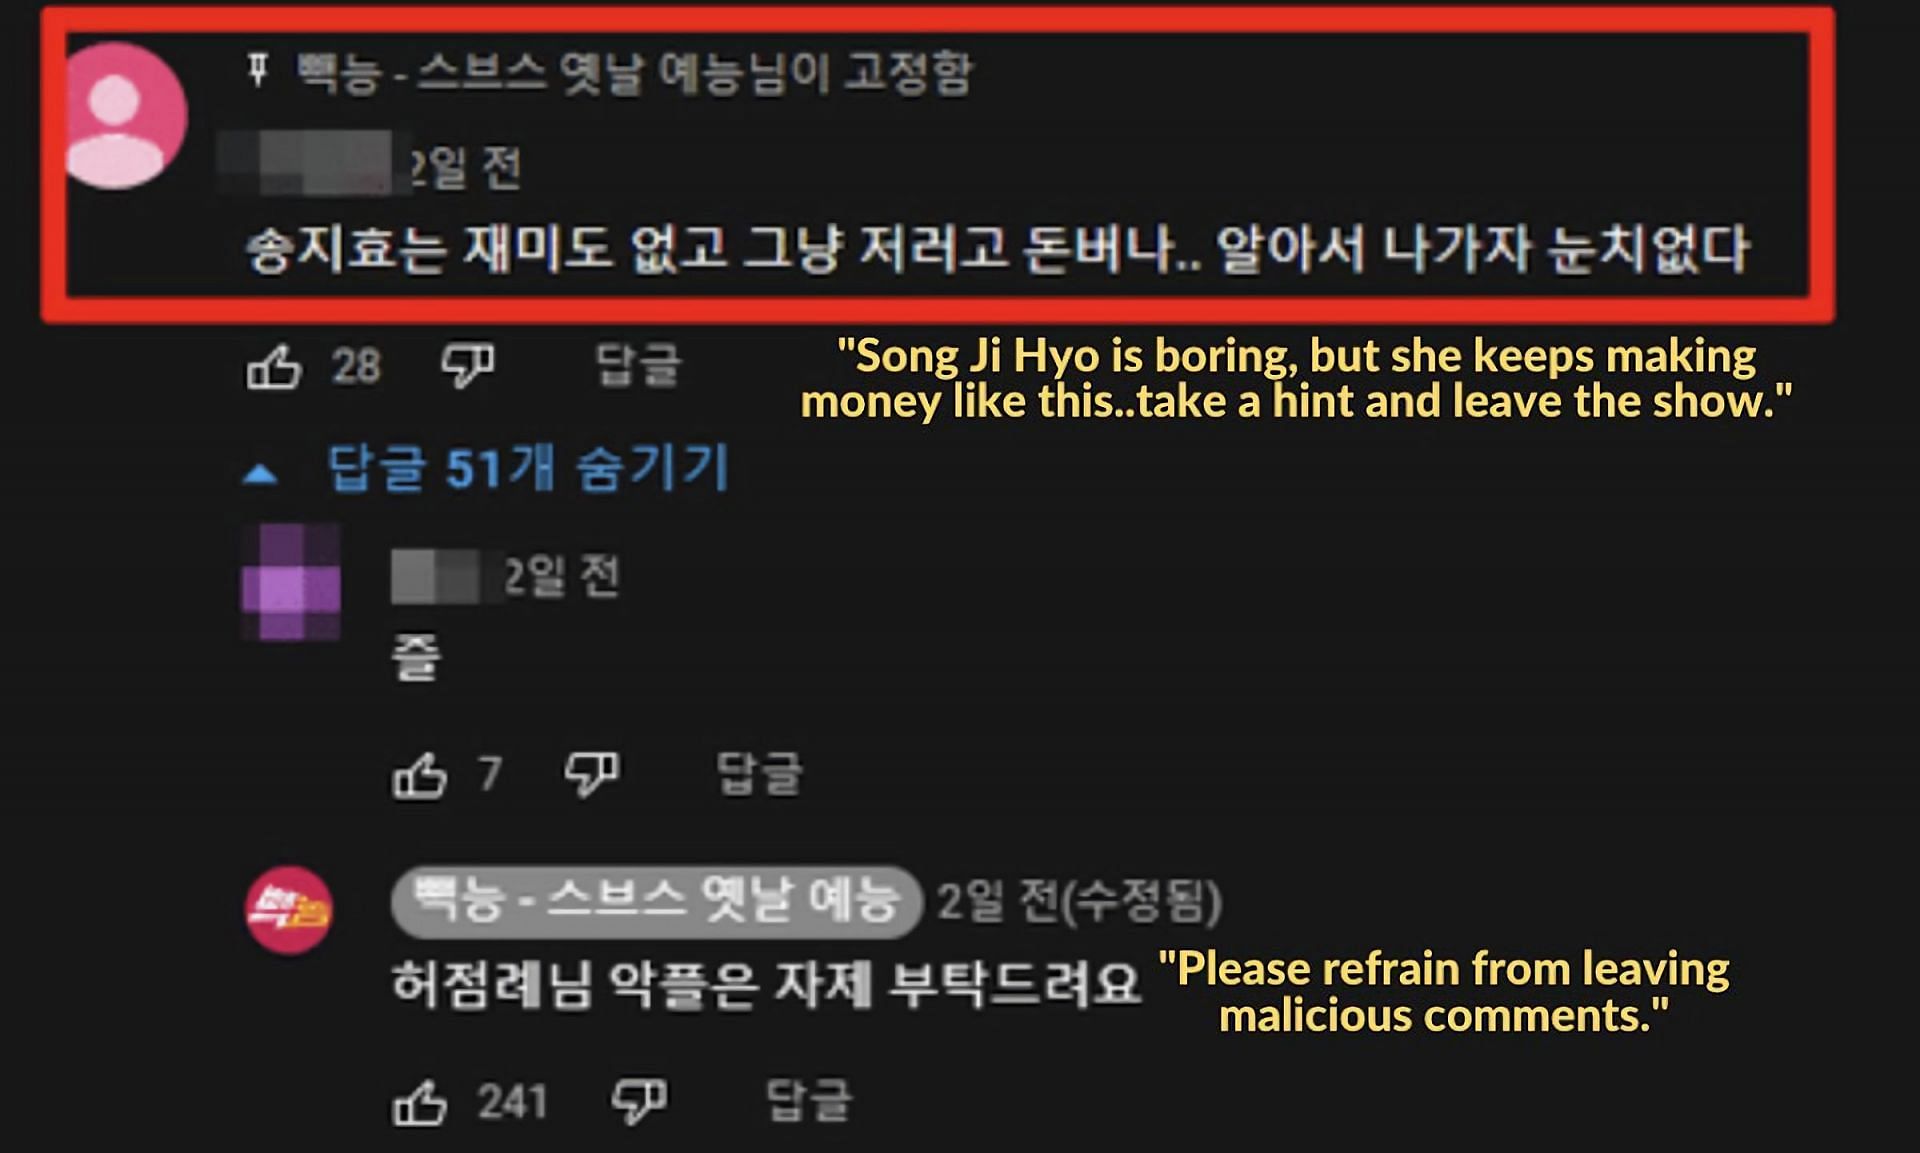 SBS said &quot;Please refrain from malicious comments.&quot; (Image via YouTube/@&lsquo;빽능 &ndash; 스브스 옛날 예능,)